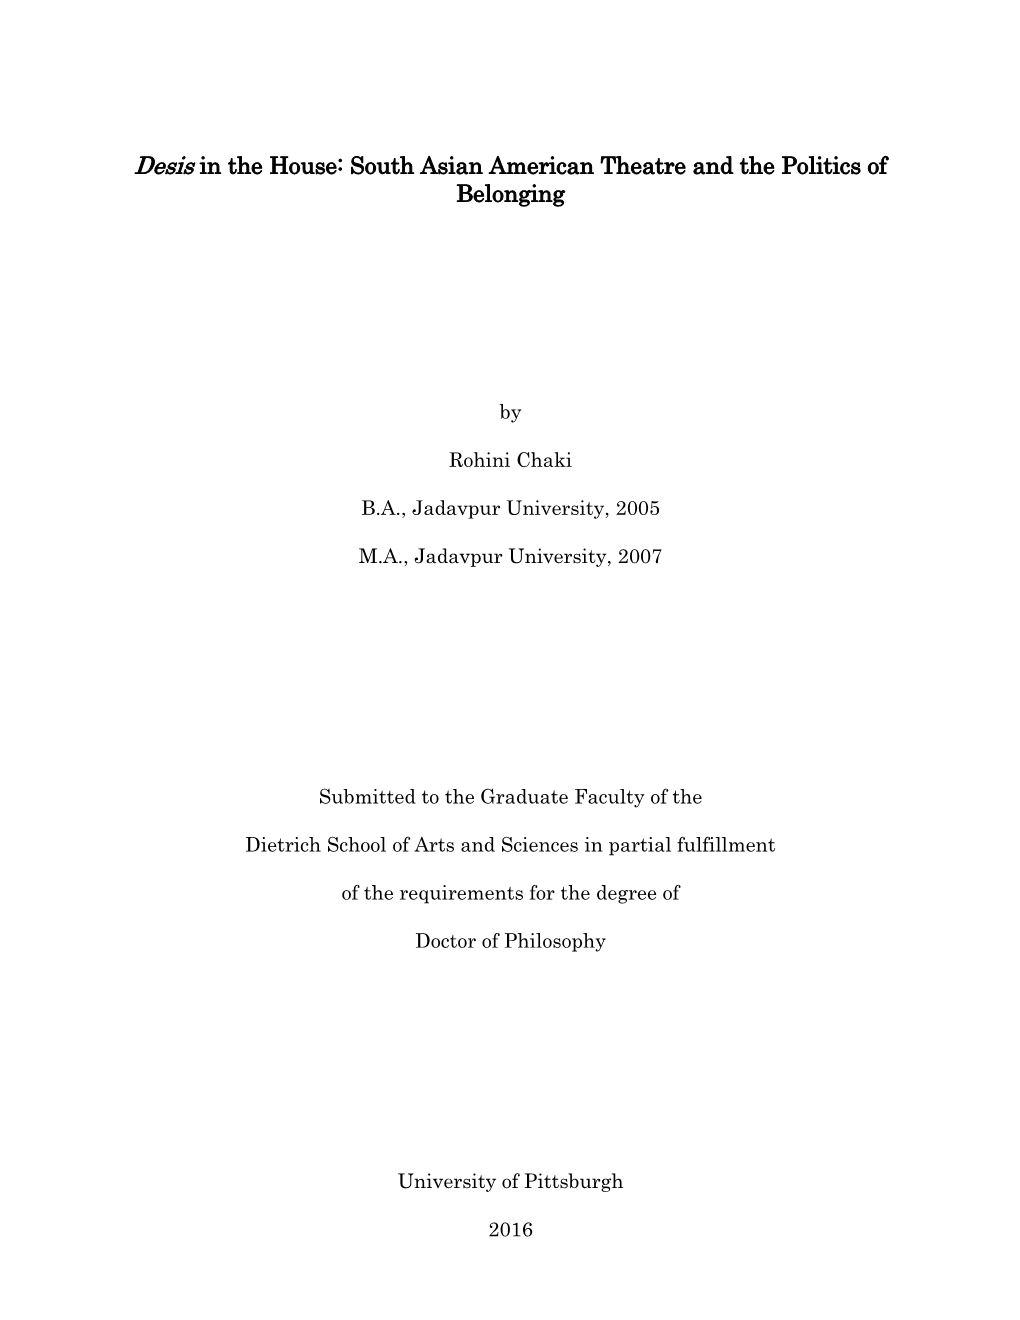 Desis in the House: South Asian American Theatre and the Politics of Belonging